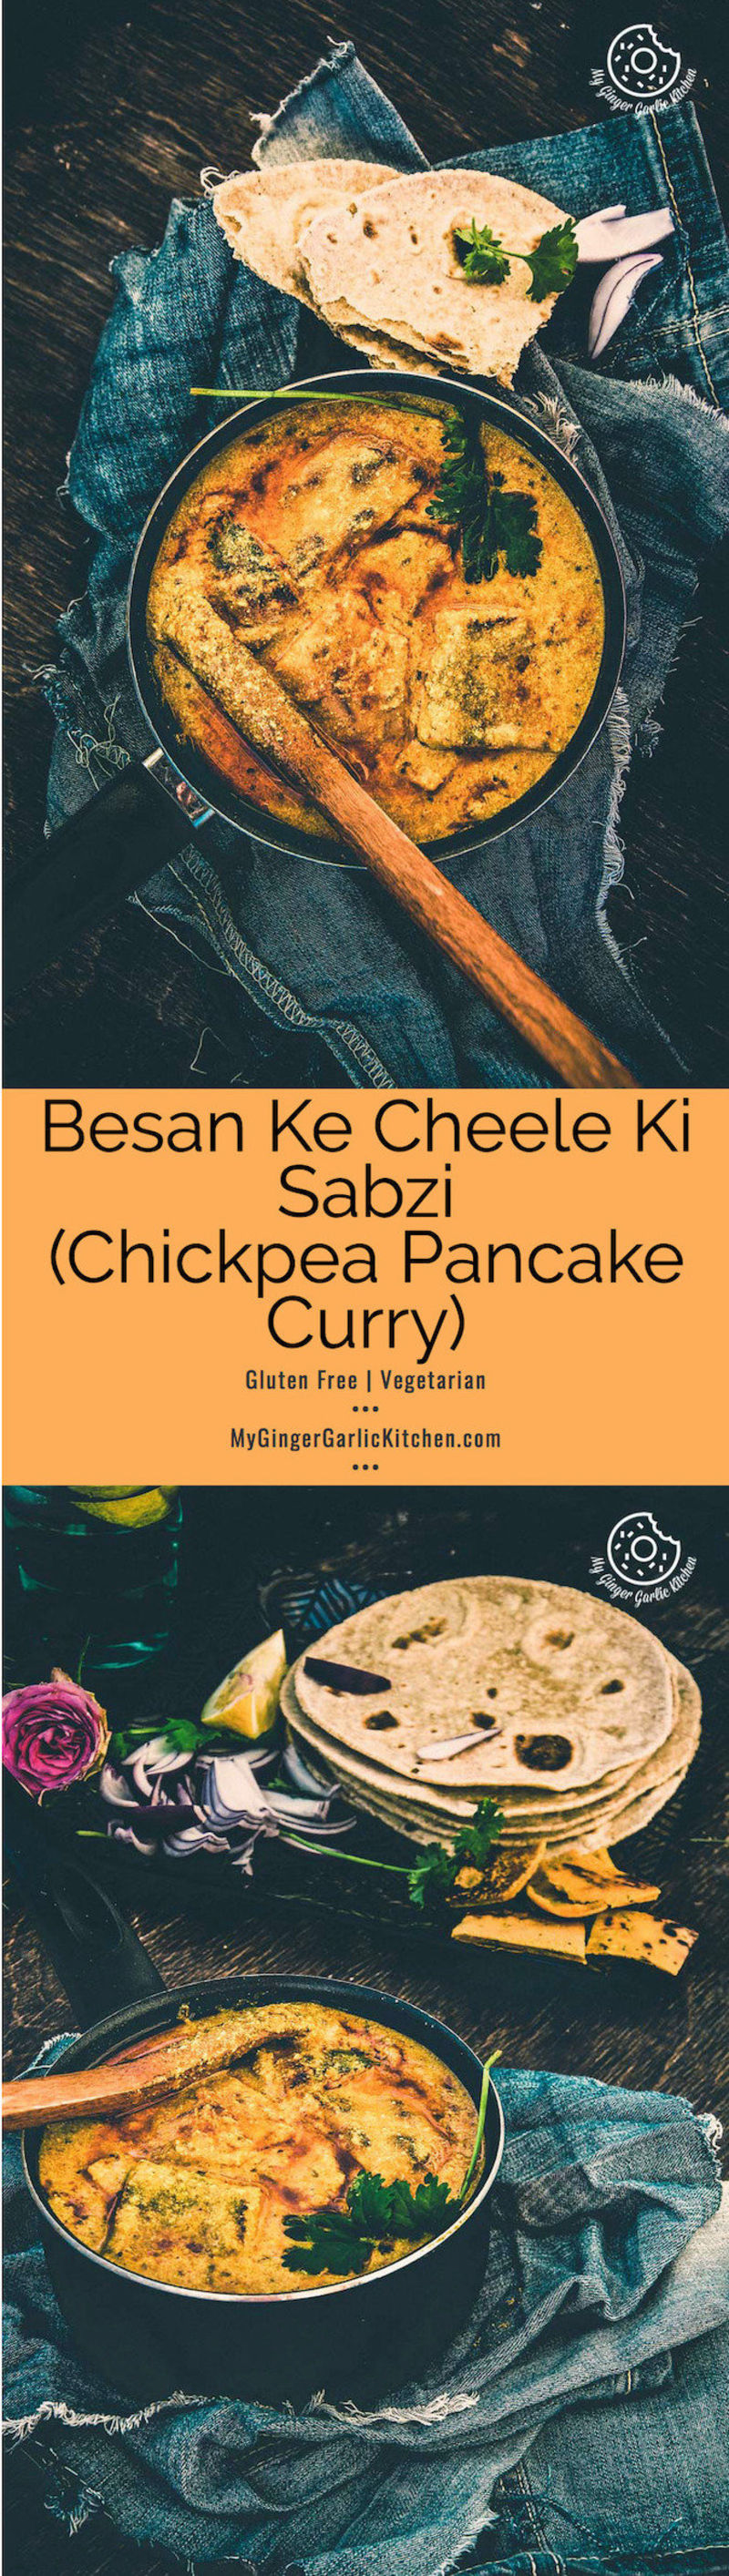 two photos of a pan of besan ke cheele ki sabzi on a table with a wooden spoon